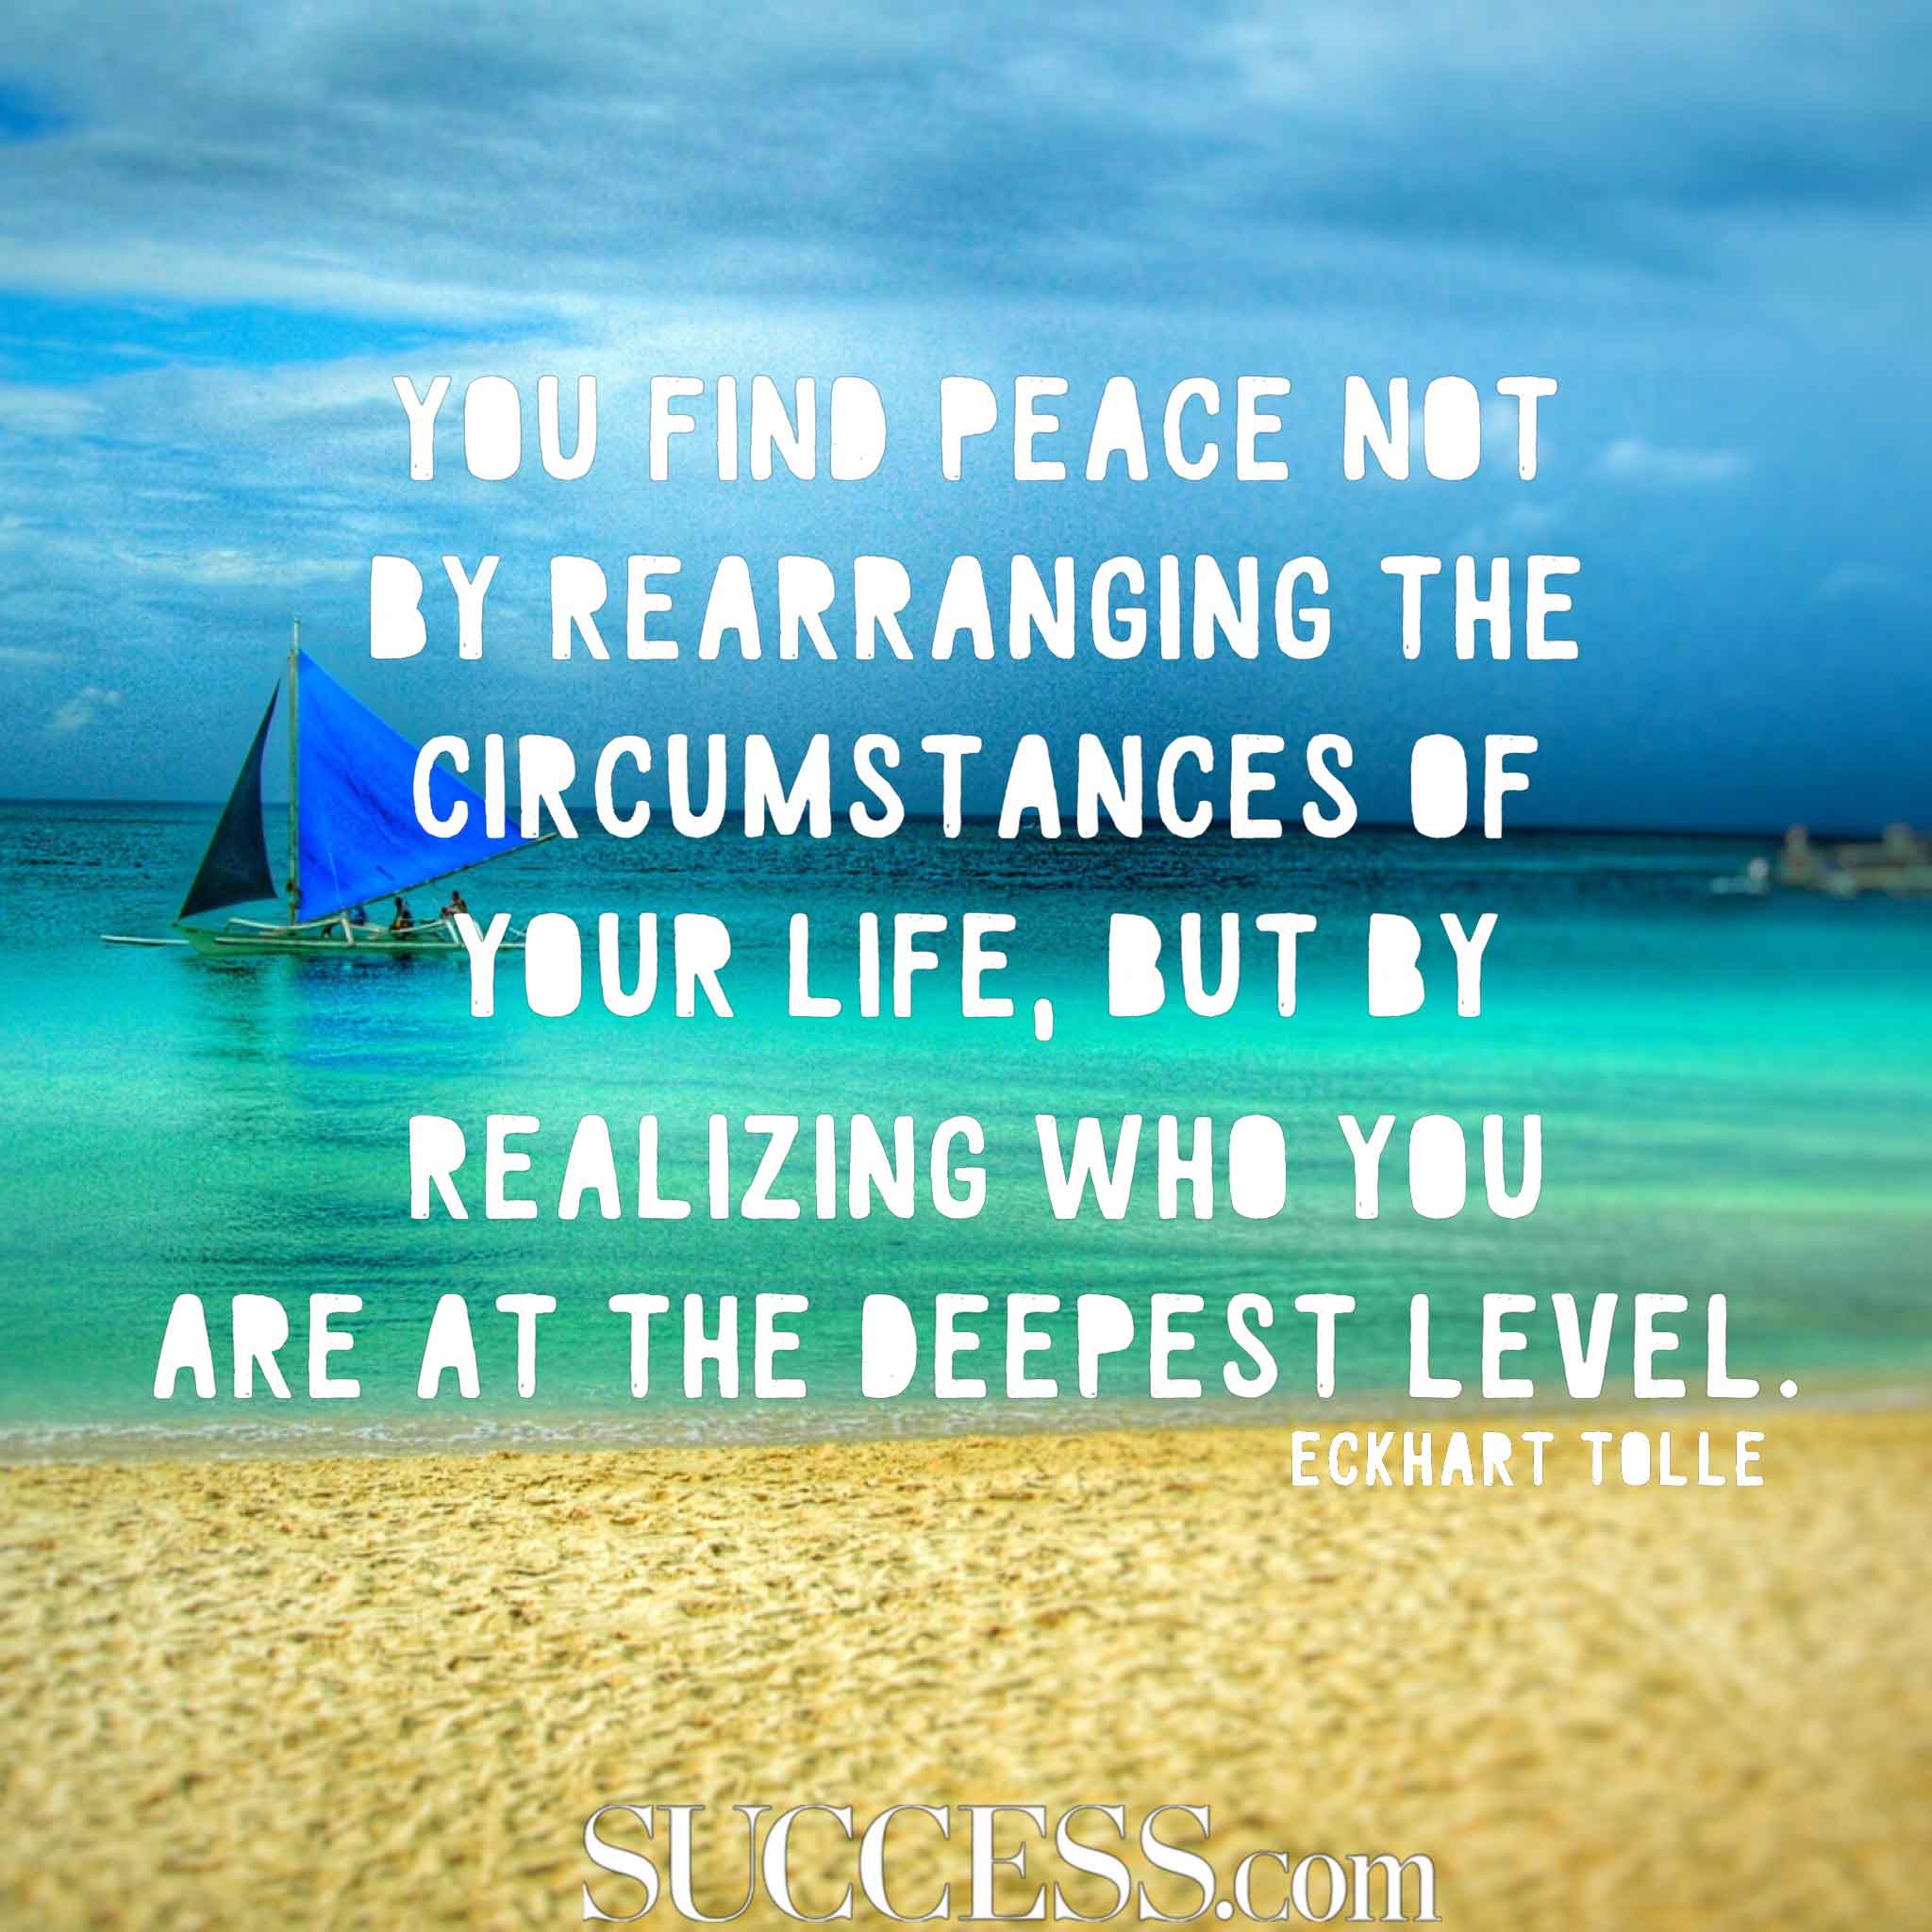 17 Quotes About Finding Inner Peace